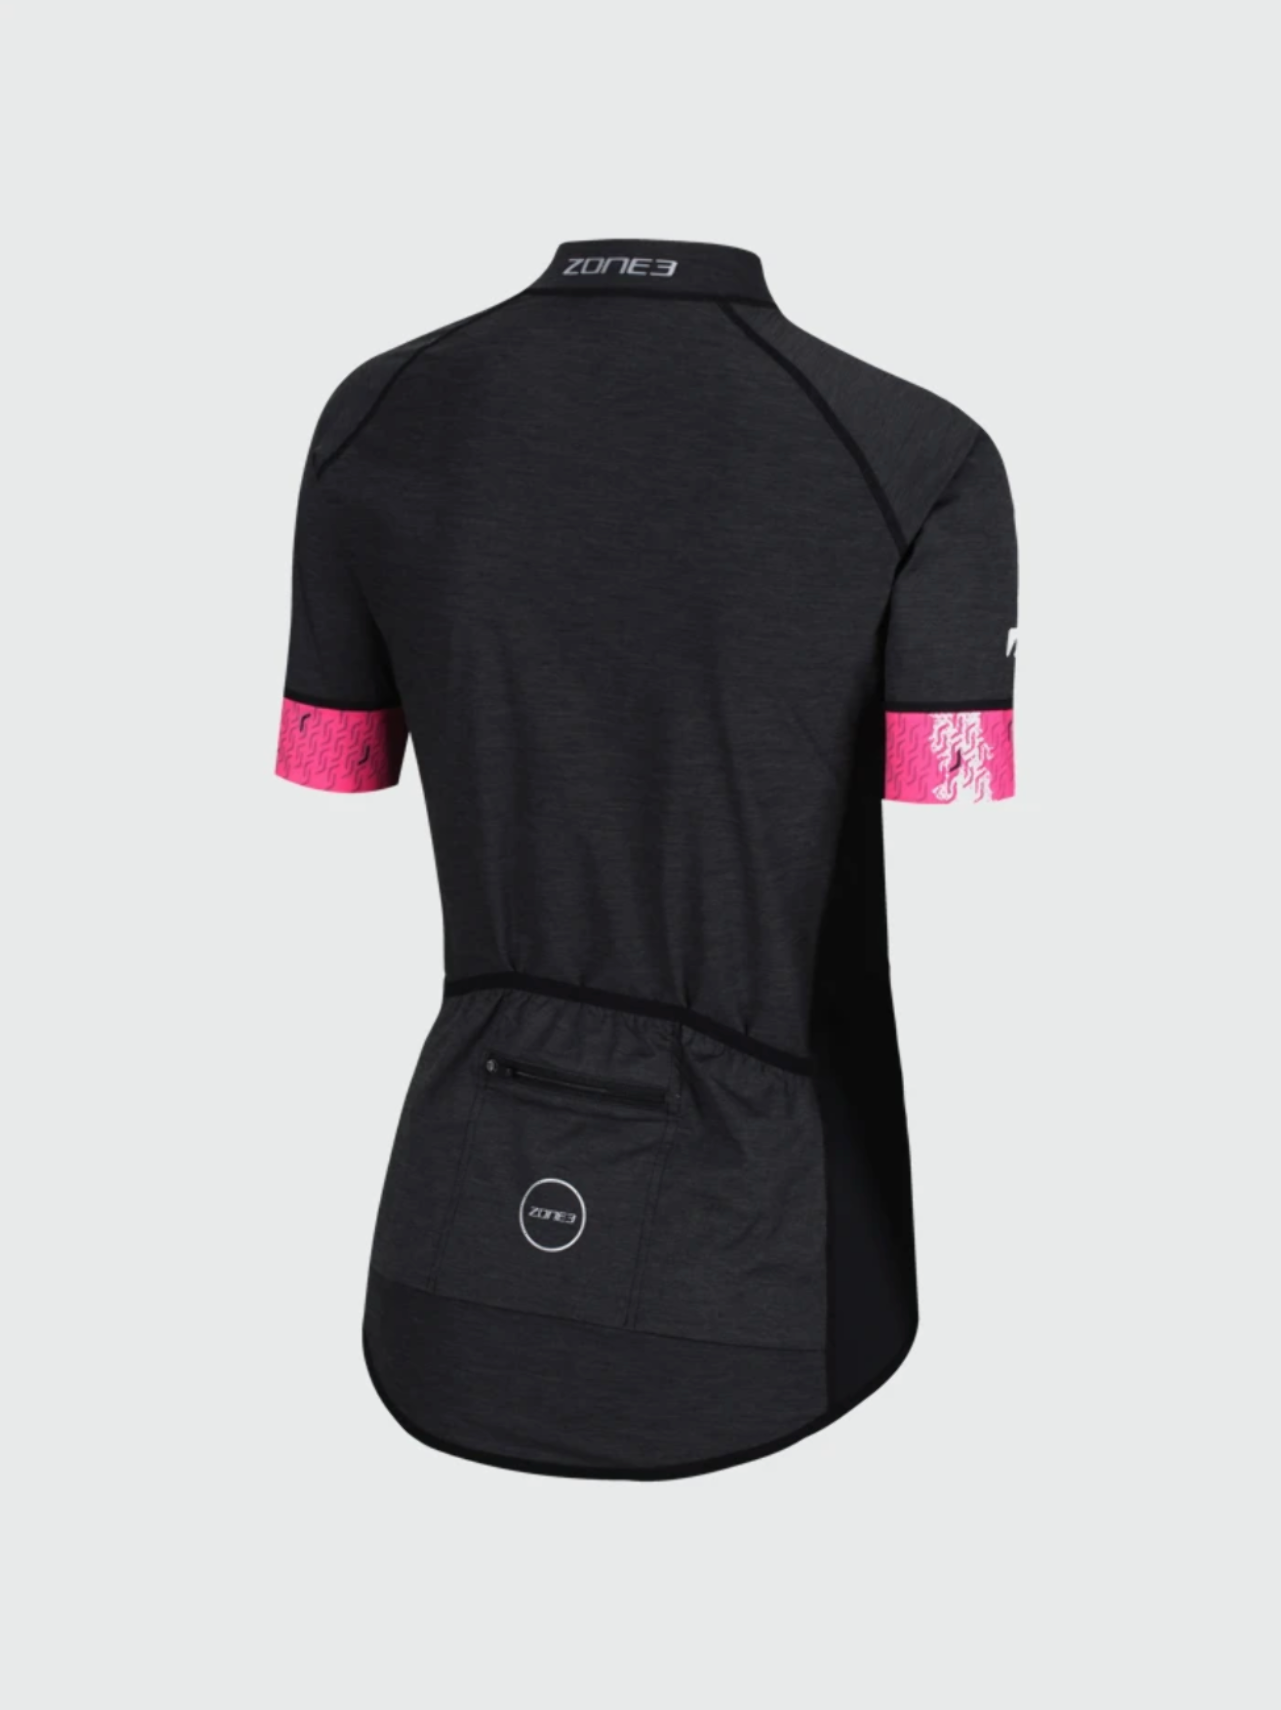 Zone3 Women’s Performance Culture Cycle Jersey